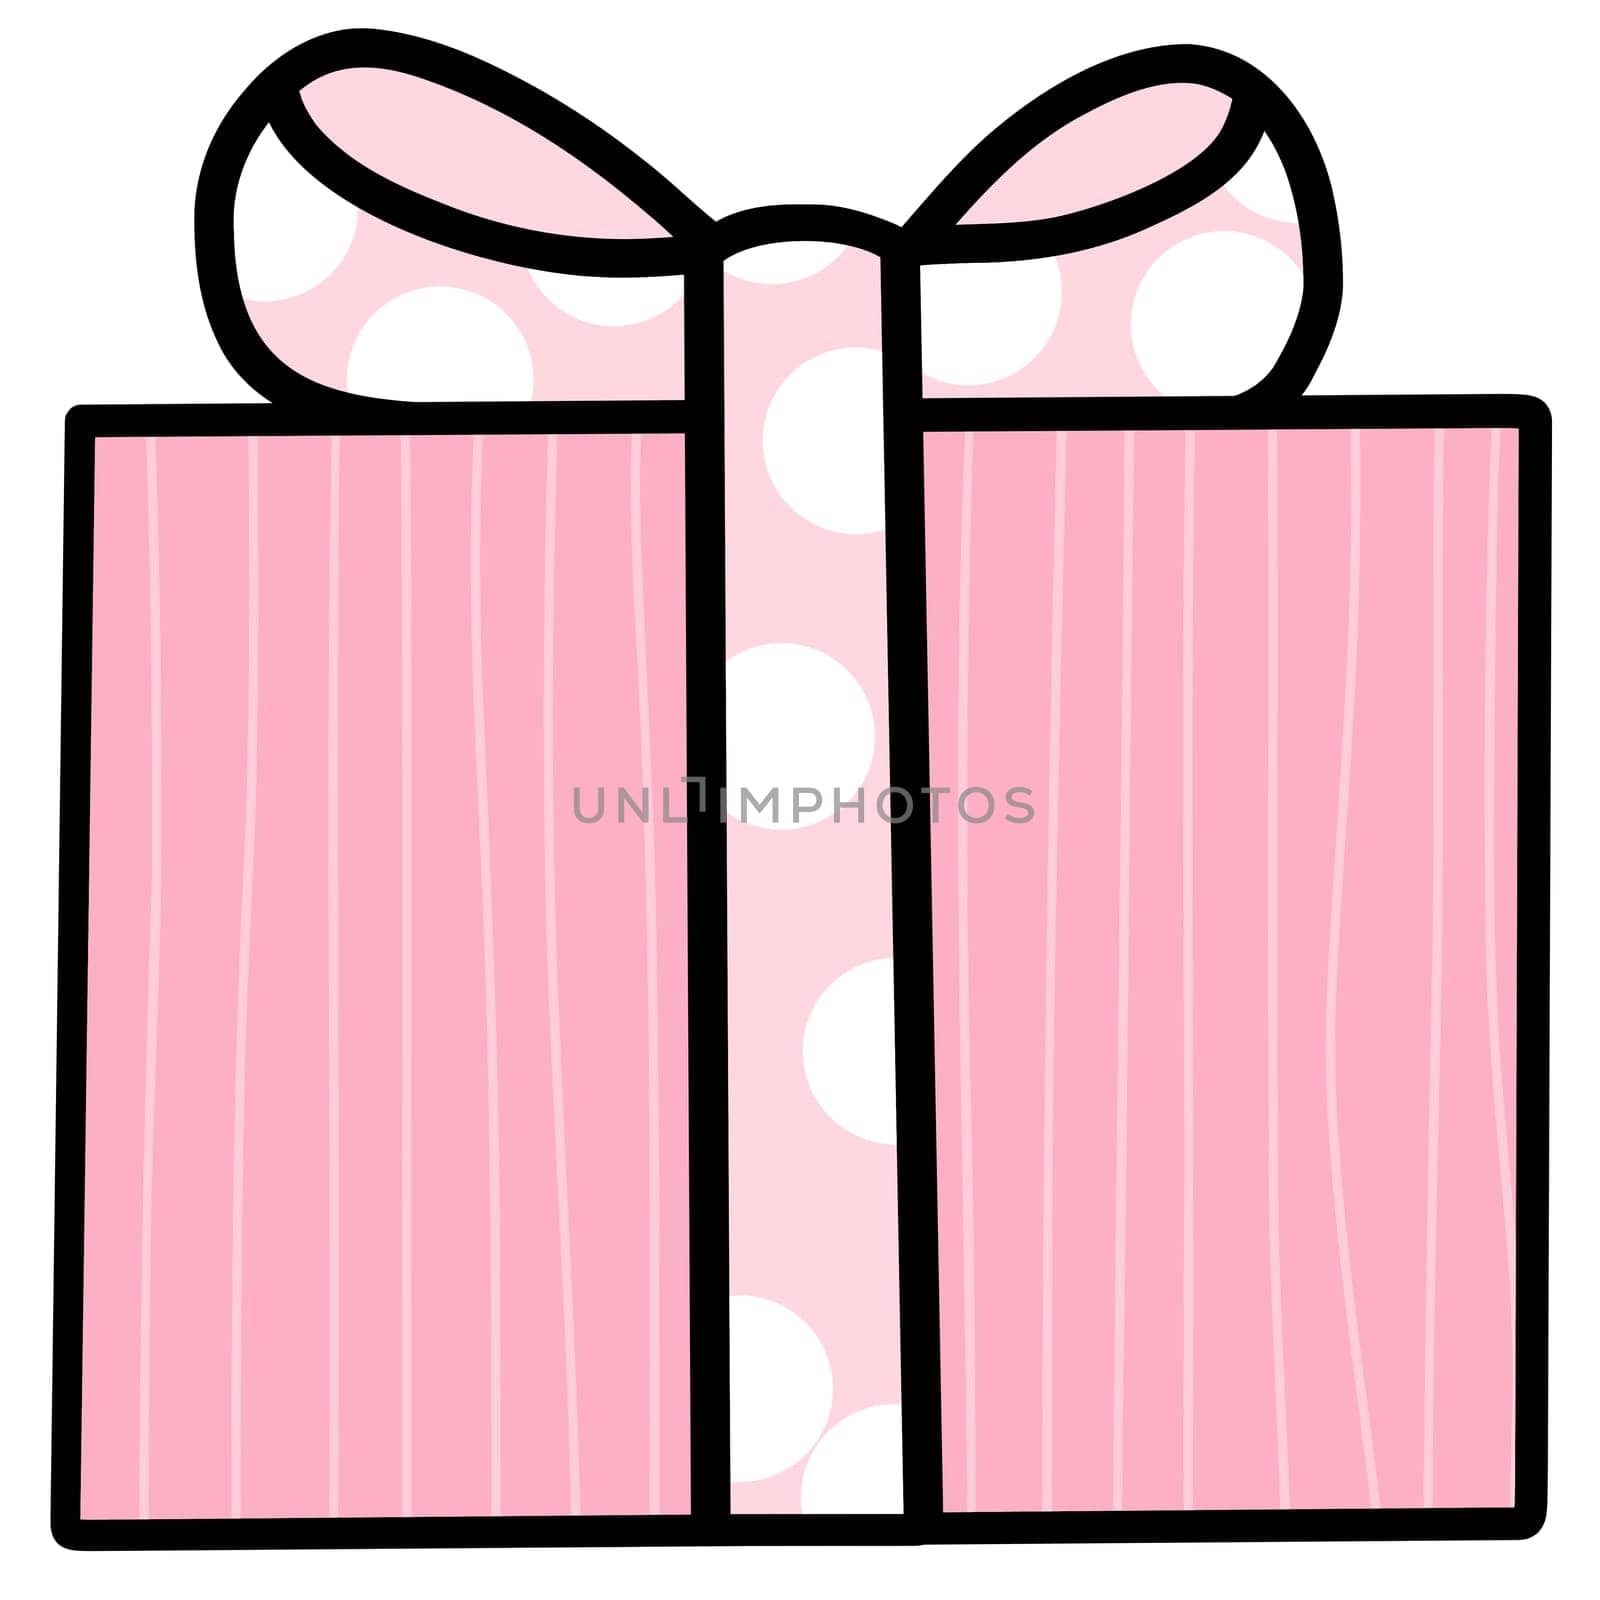 Drawing of pink gift box isolated on white background for usage as an illustration and an item given to show goodwill on various occasions by iamnoonmai